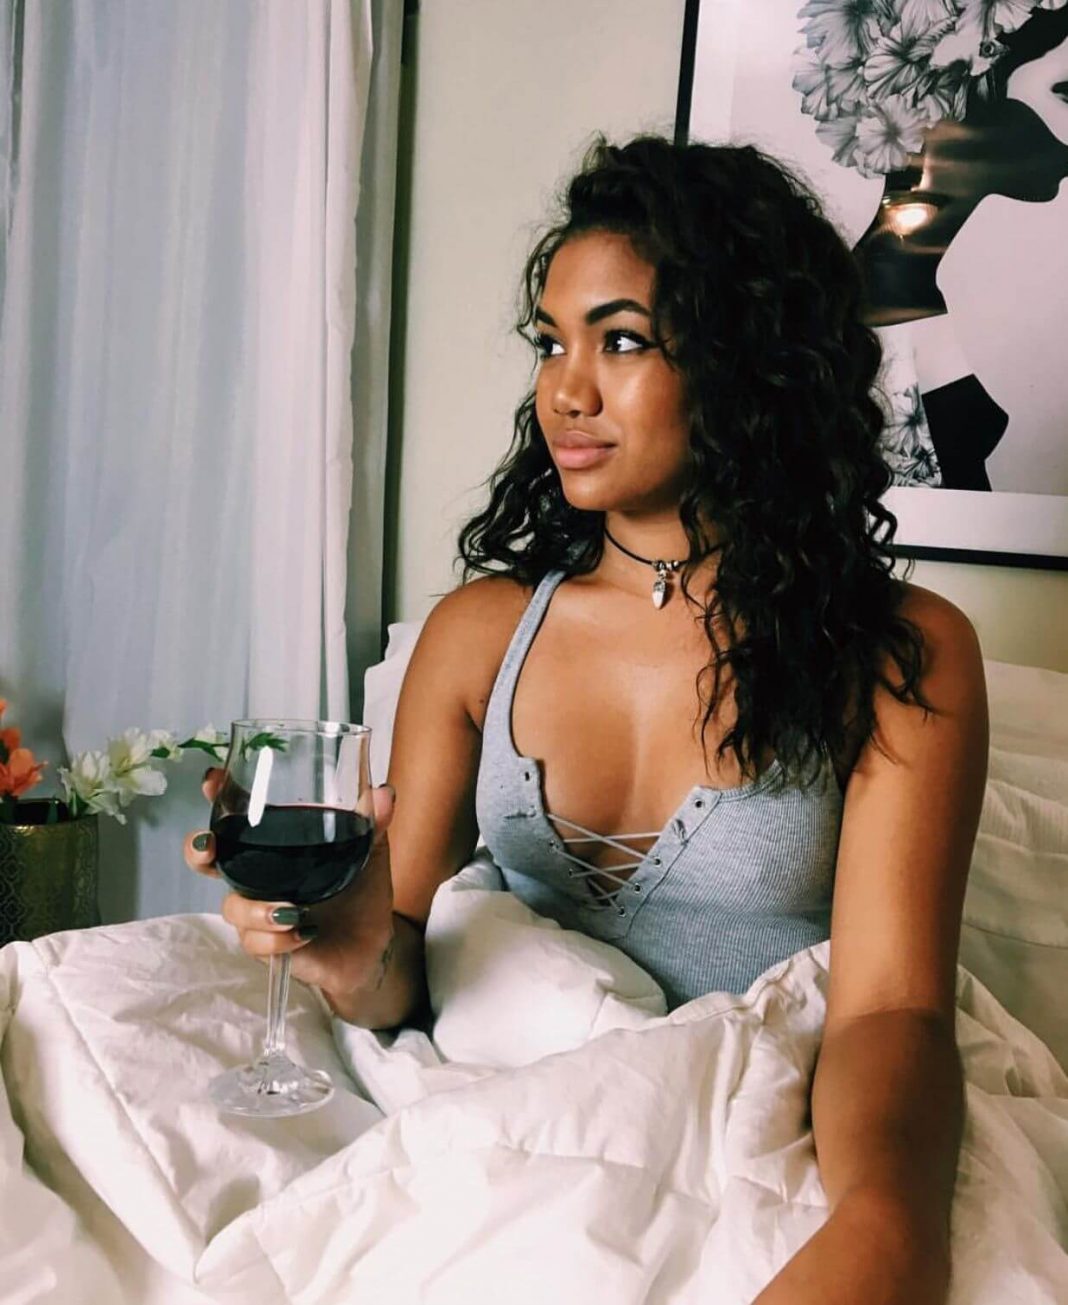 51 Paige Hurd Nude Pictures Which Makes Her An Enigmatic Glamor Quotient 16